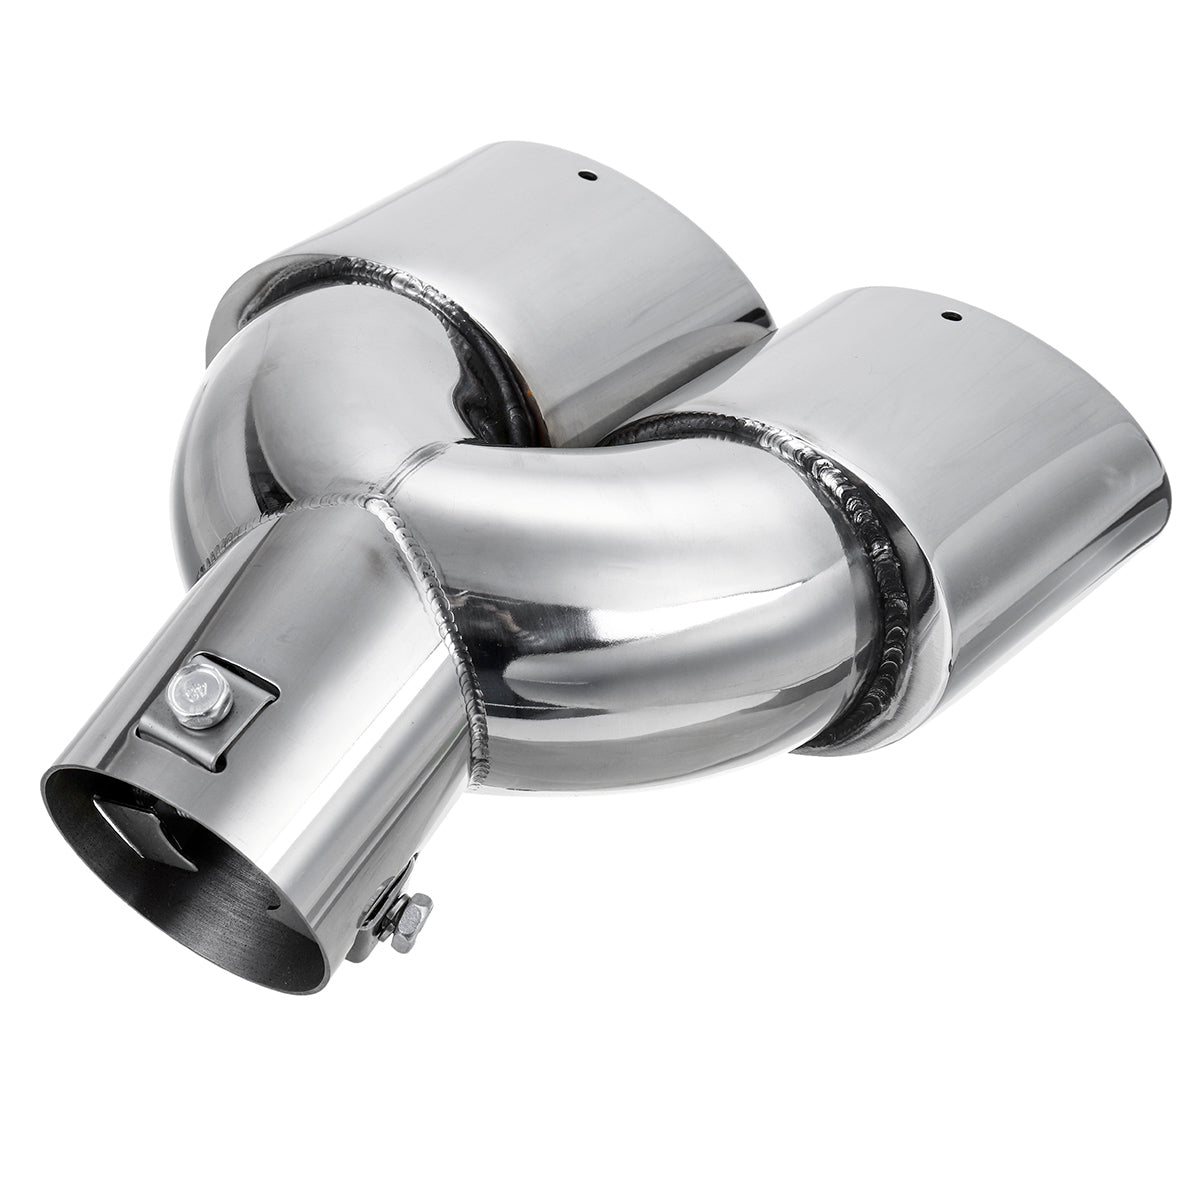 Universal 63mm Car Inlet Dual Exhaust Pipe Trim Tip Tail Muffler Stainless Steel - Auto GoShop